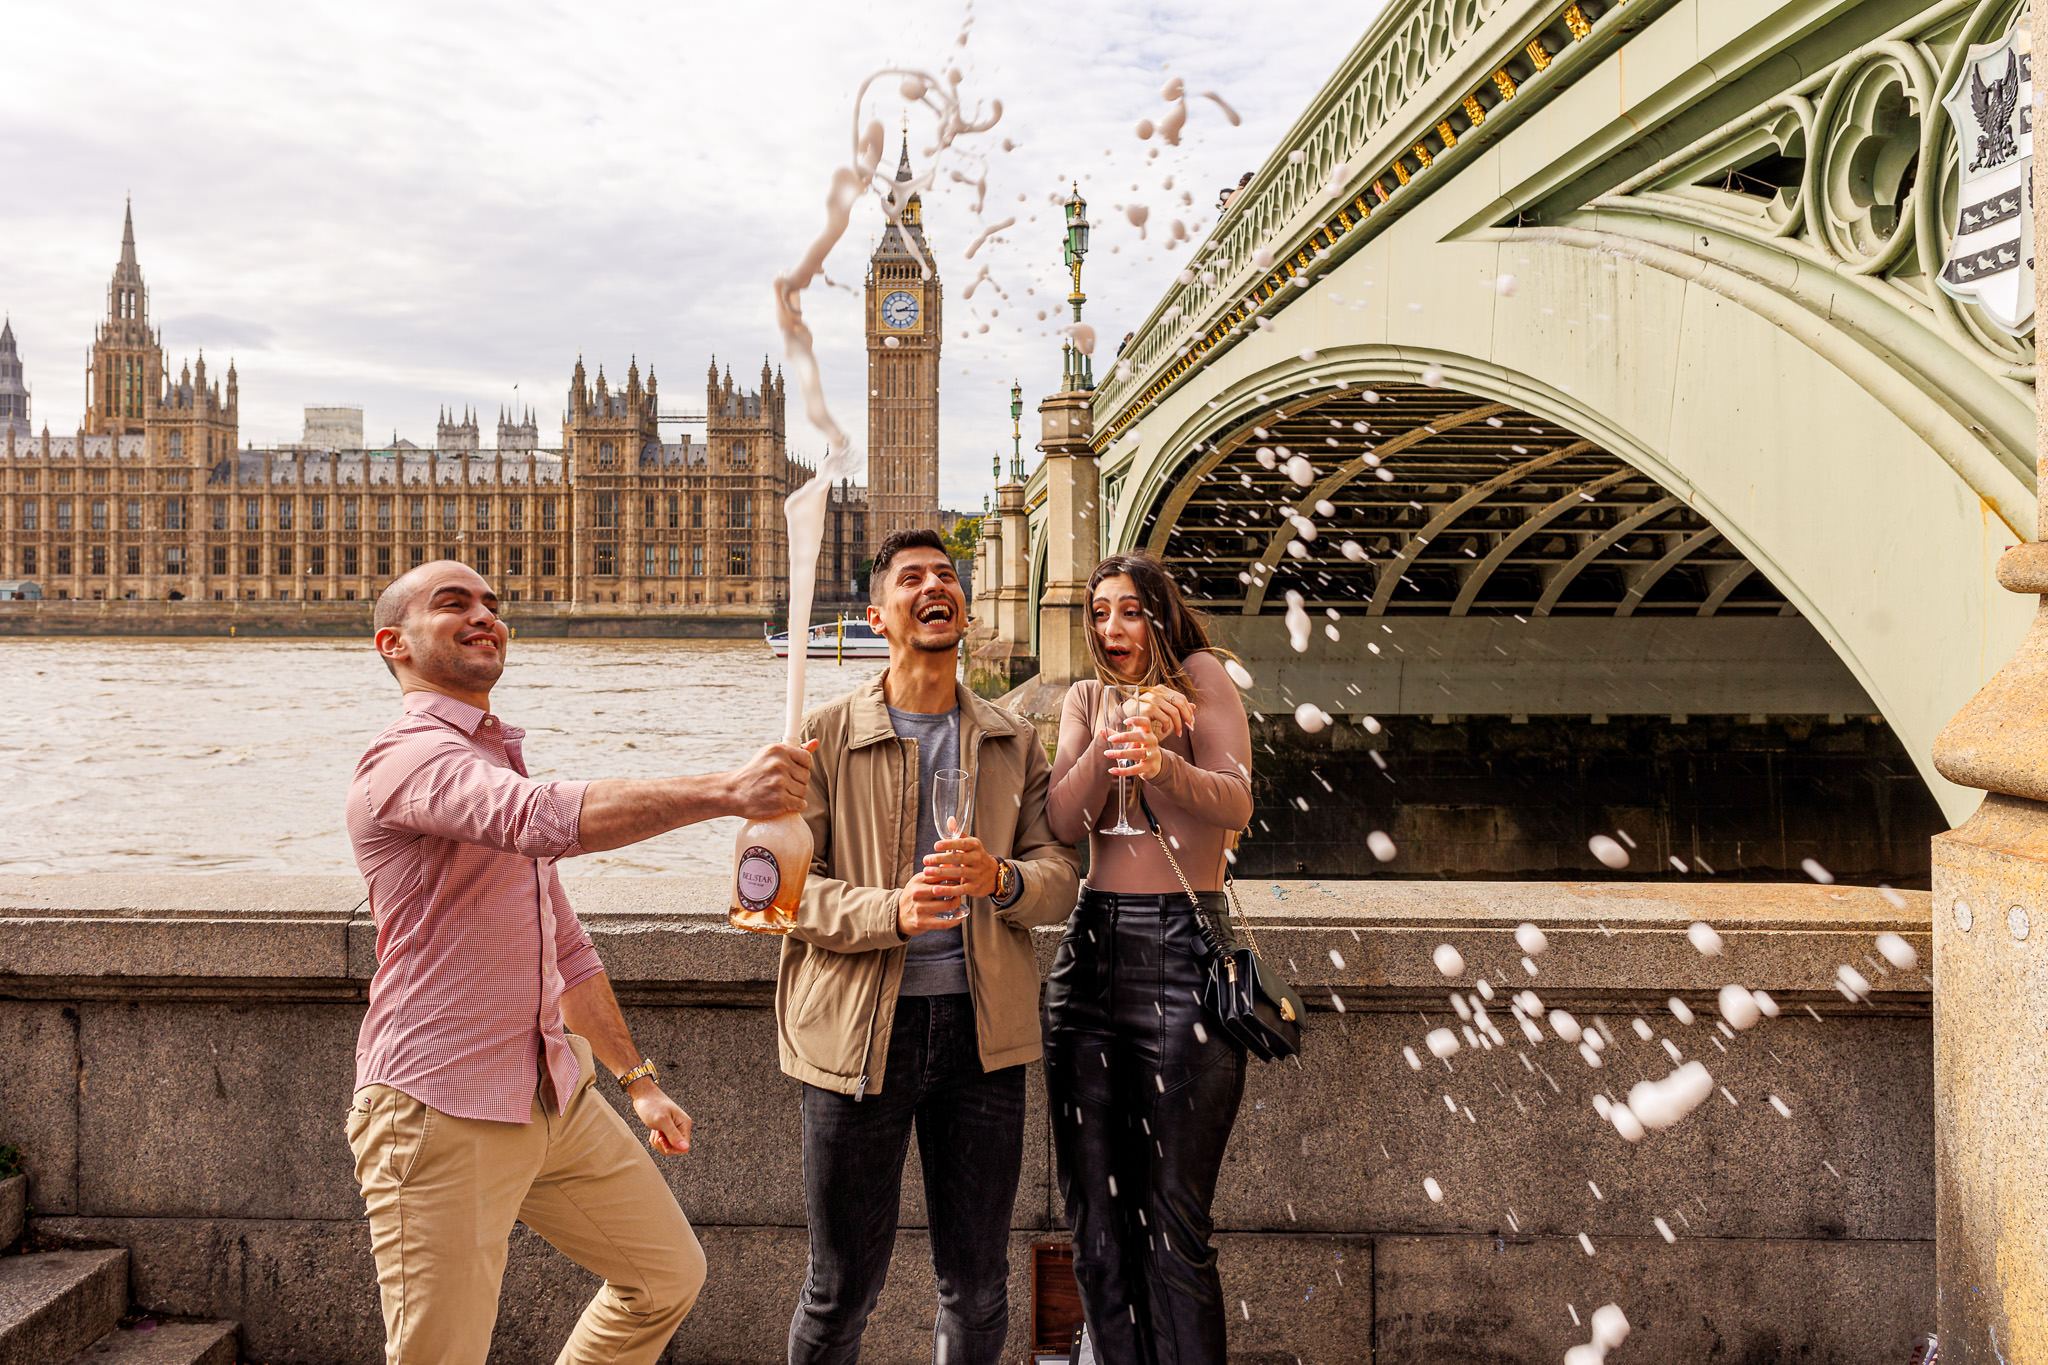 Moments after the proposal with Big Ben and Houses of Parliament a freind is opening a champagne with excitement